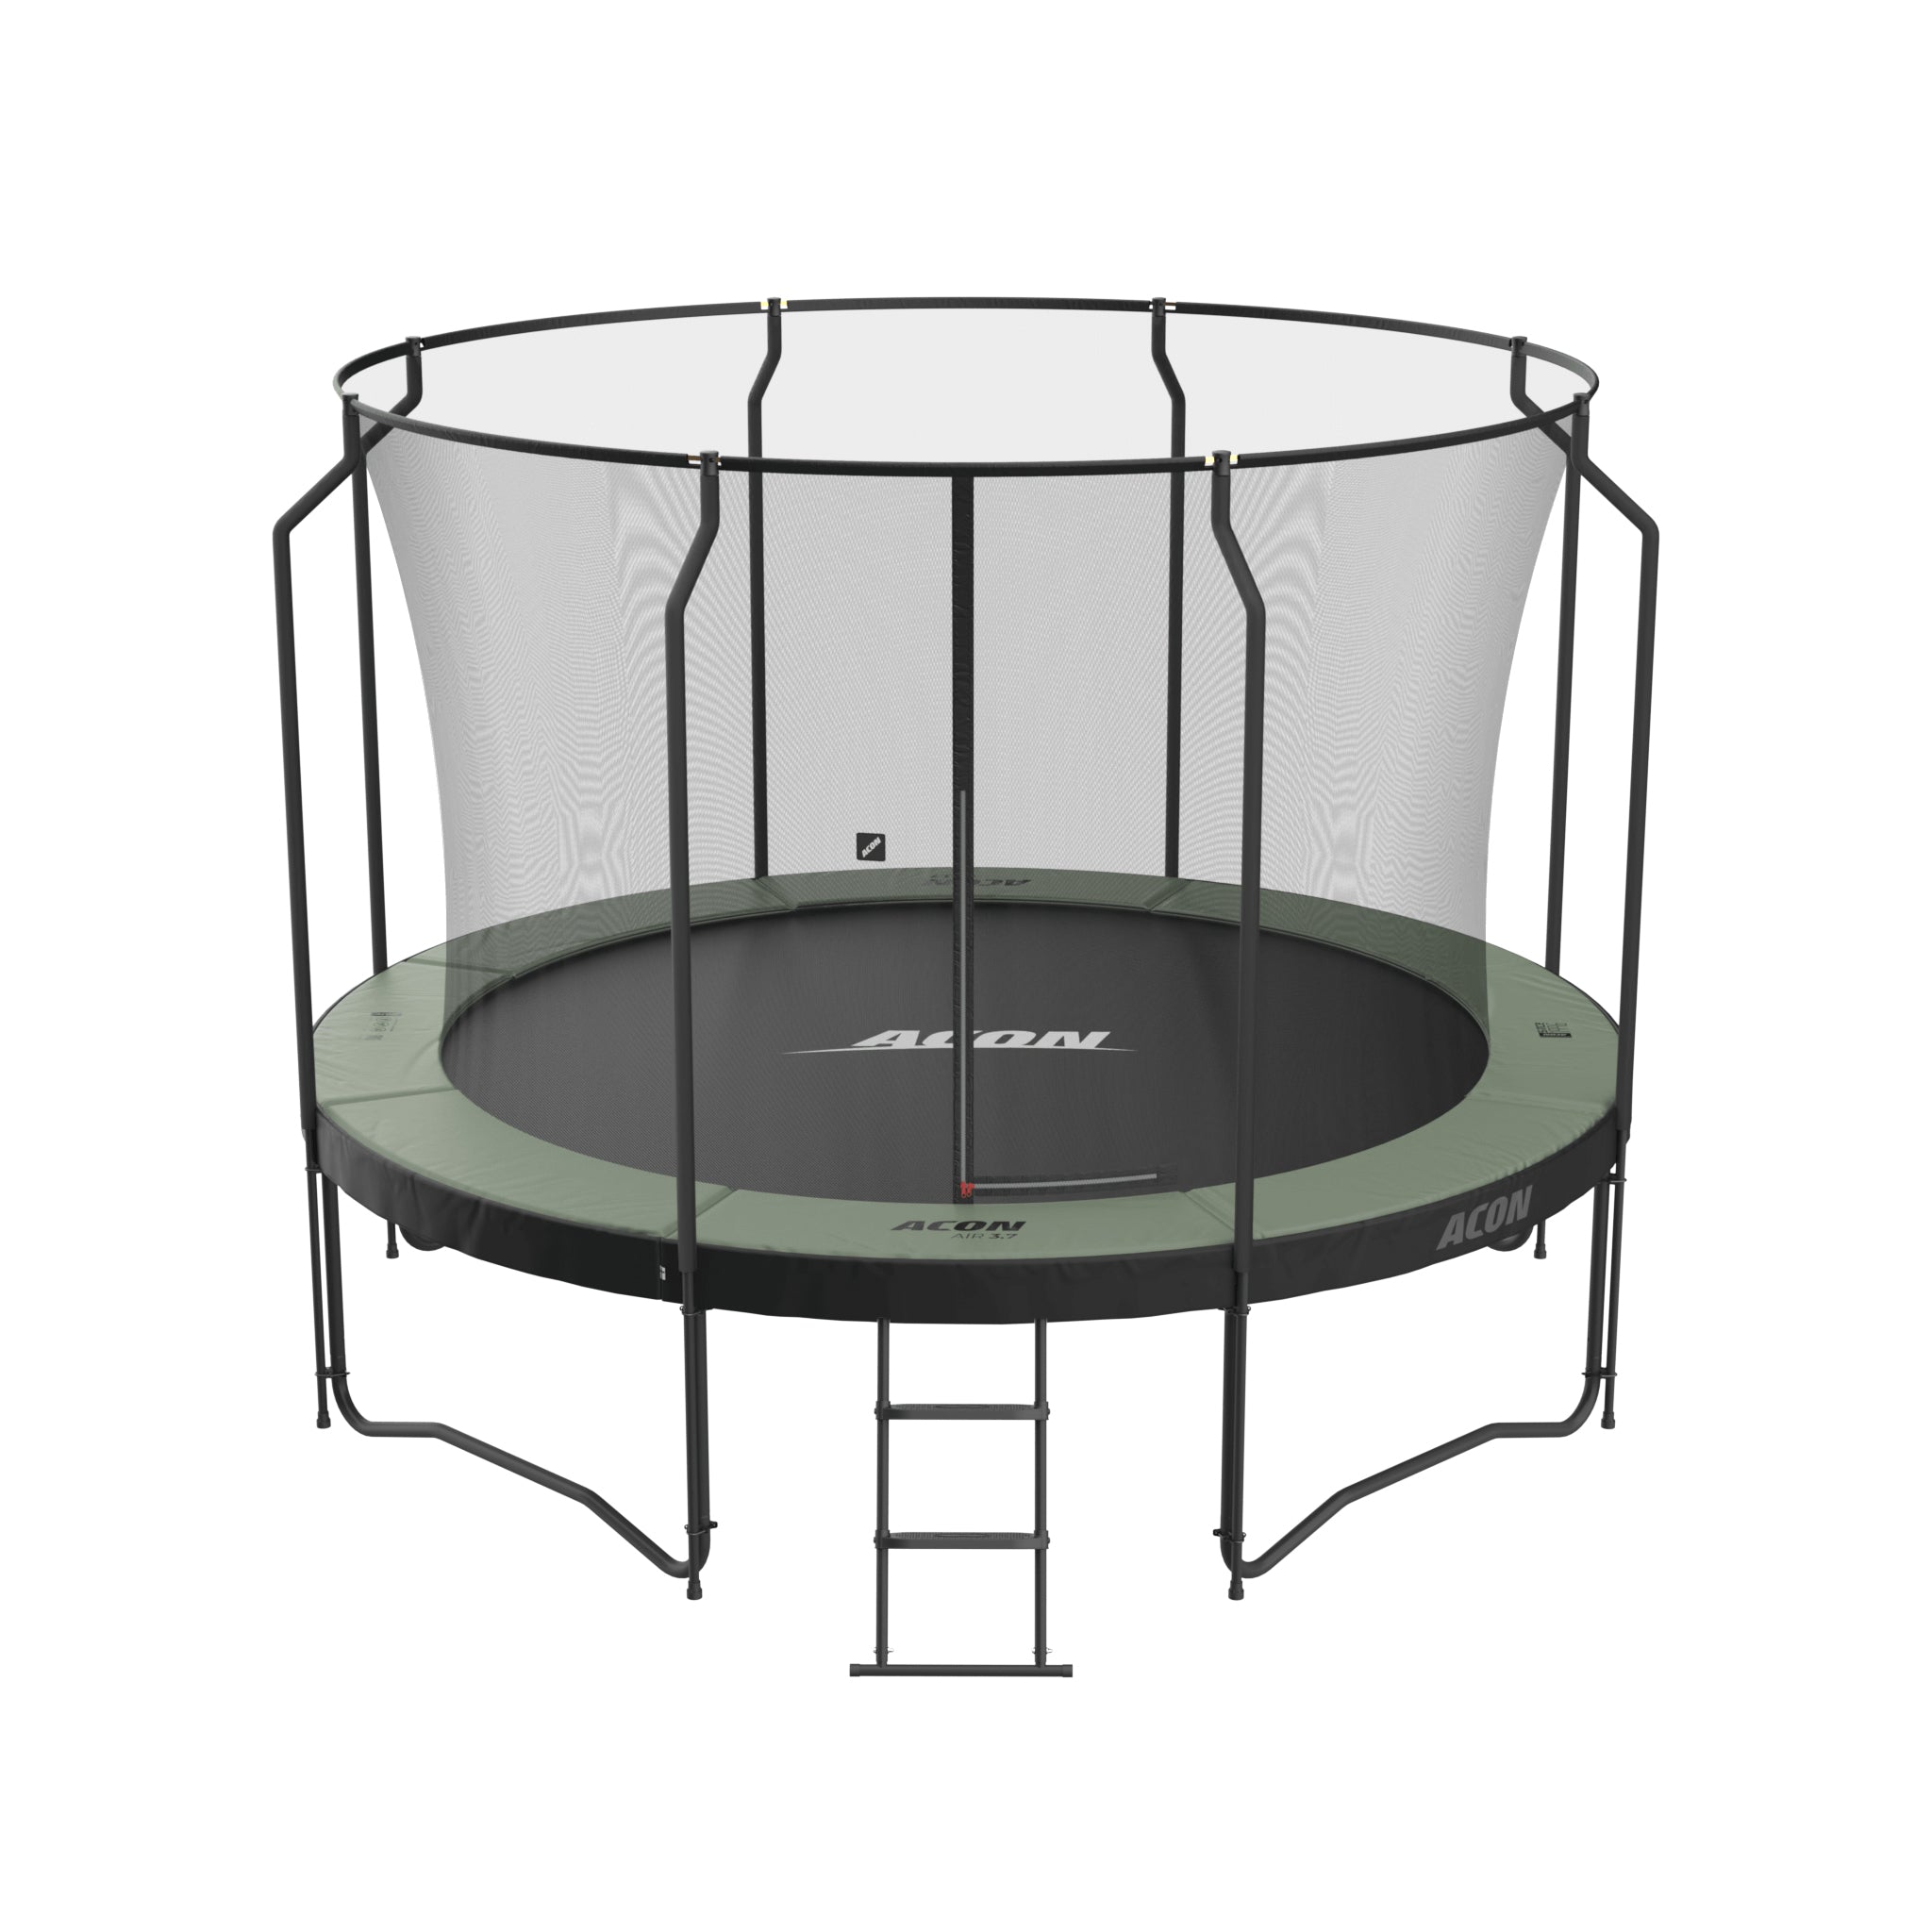 ACON Air 12ft Trampoline with Premium Enclosure and ladder.